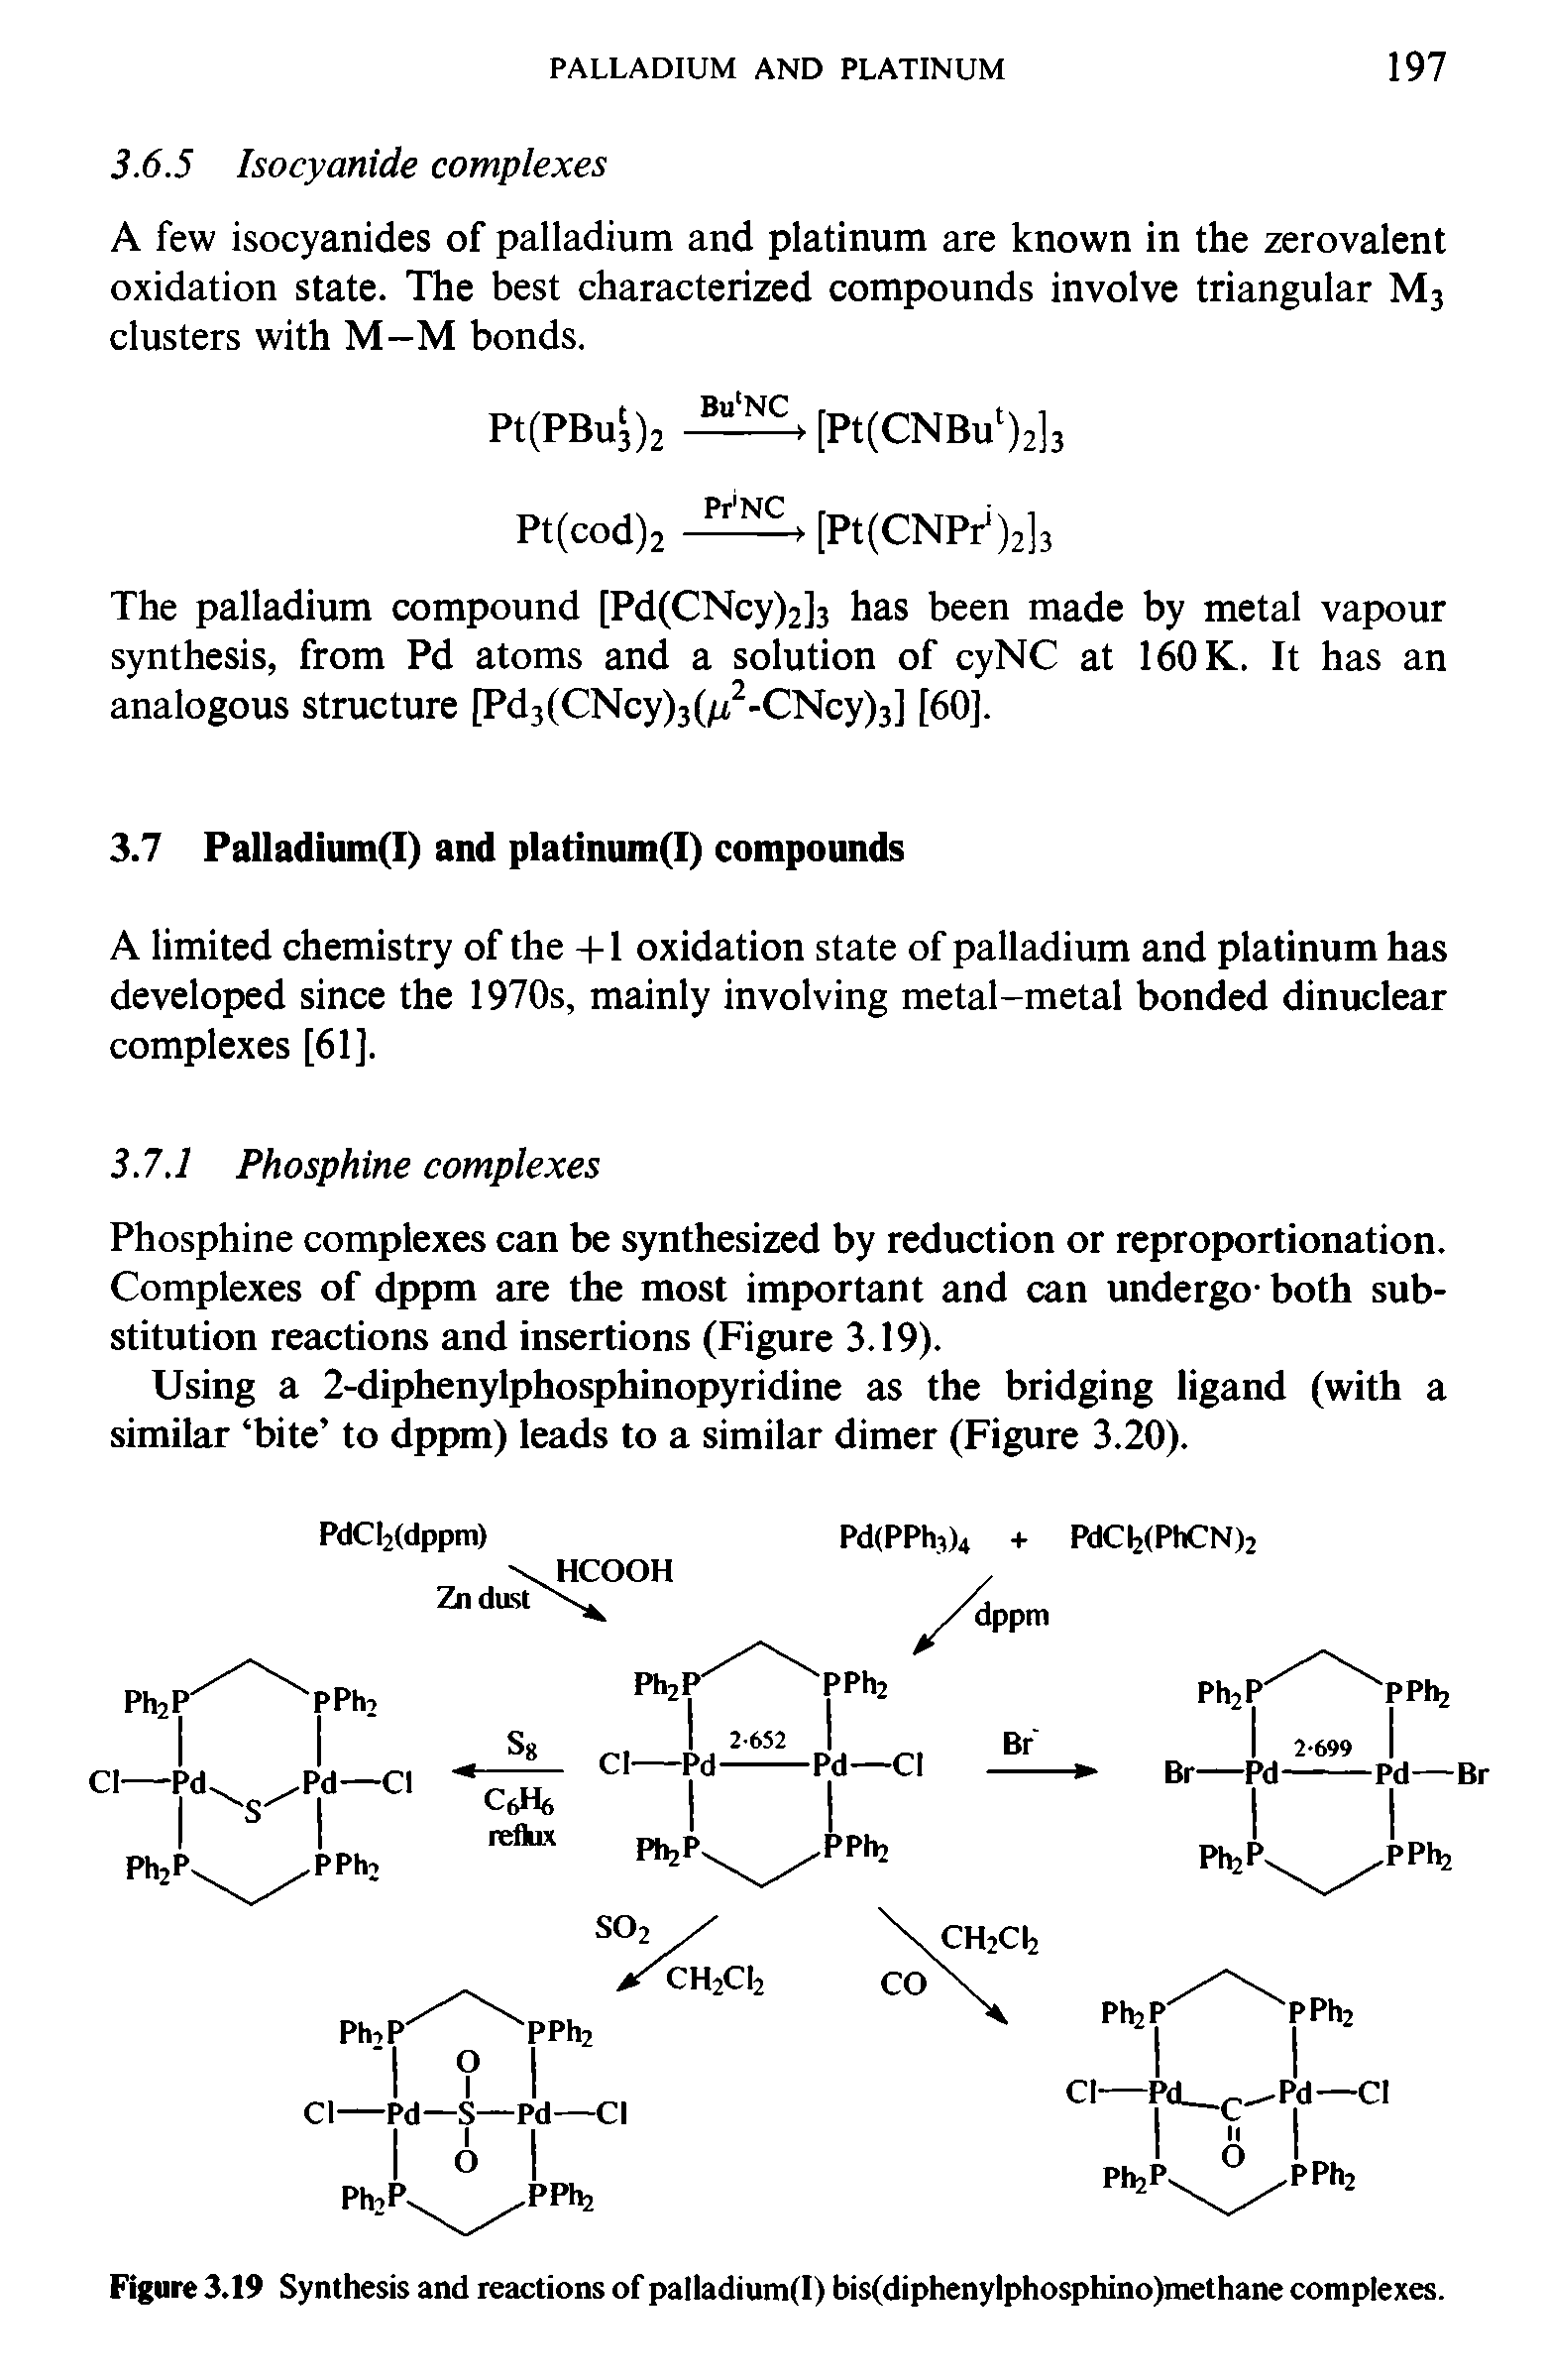 Figure 3.19 Synthesis and reactions of palladium(I) bis(diphenylphosphino)methane complexes.